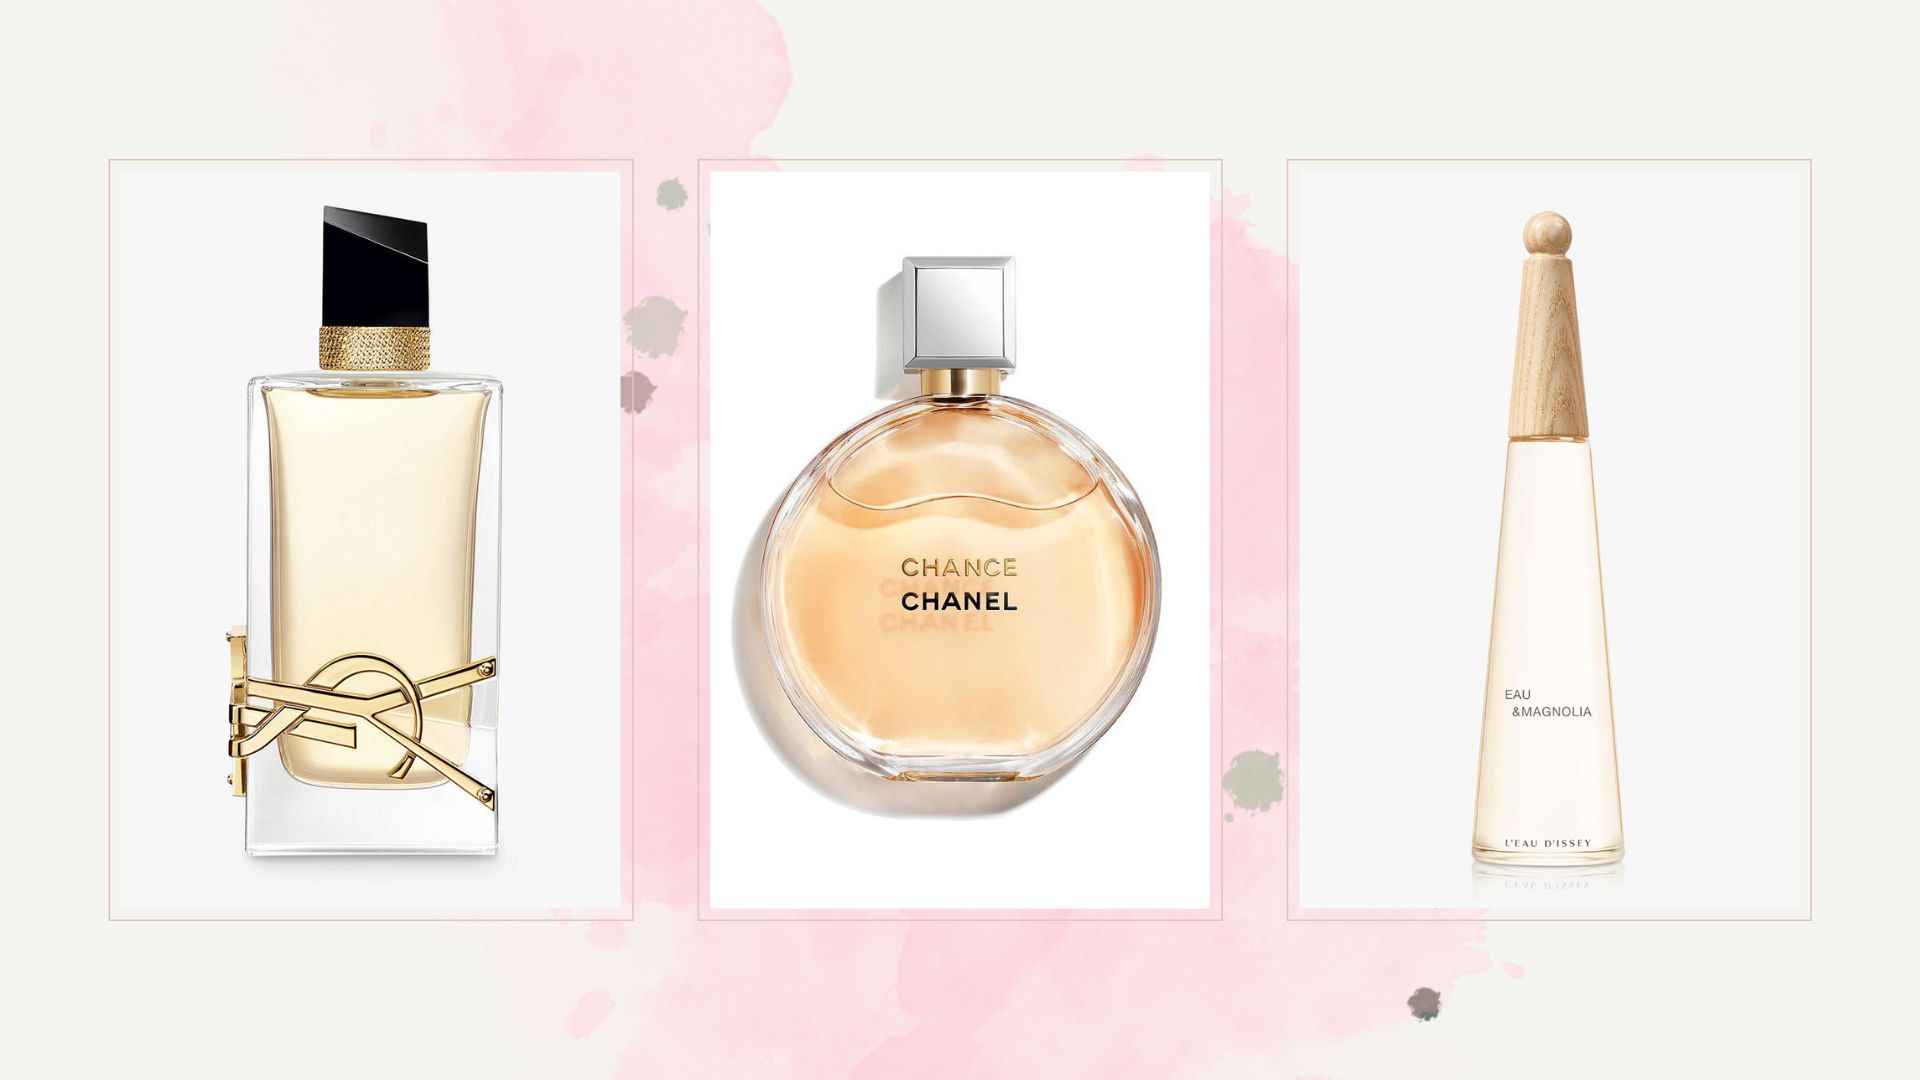 Top 7 Luxury Perfume Brands For Women and Their Best Scents